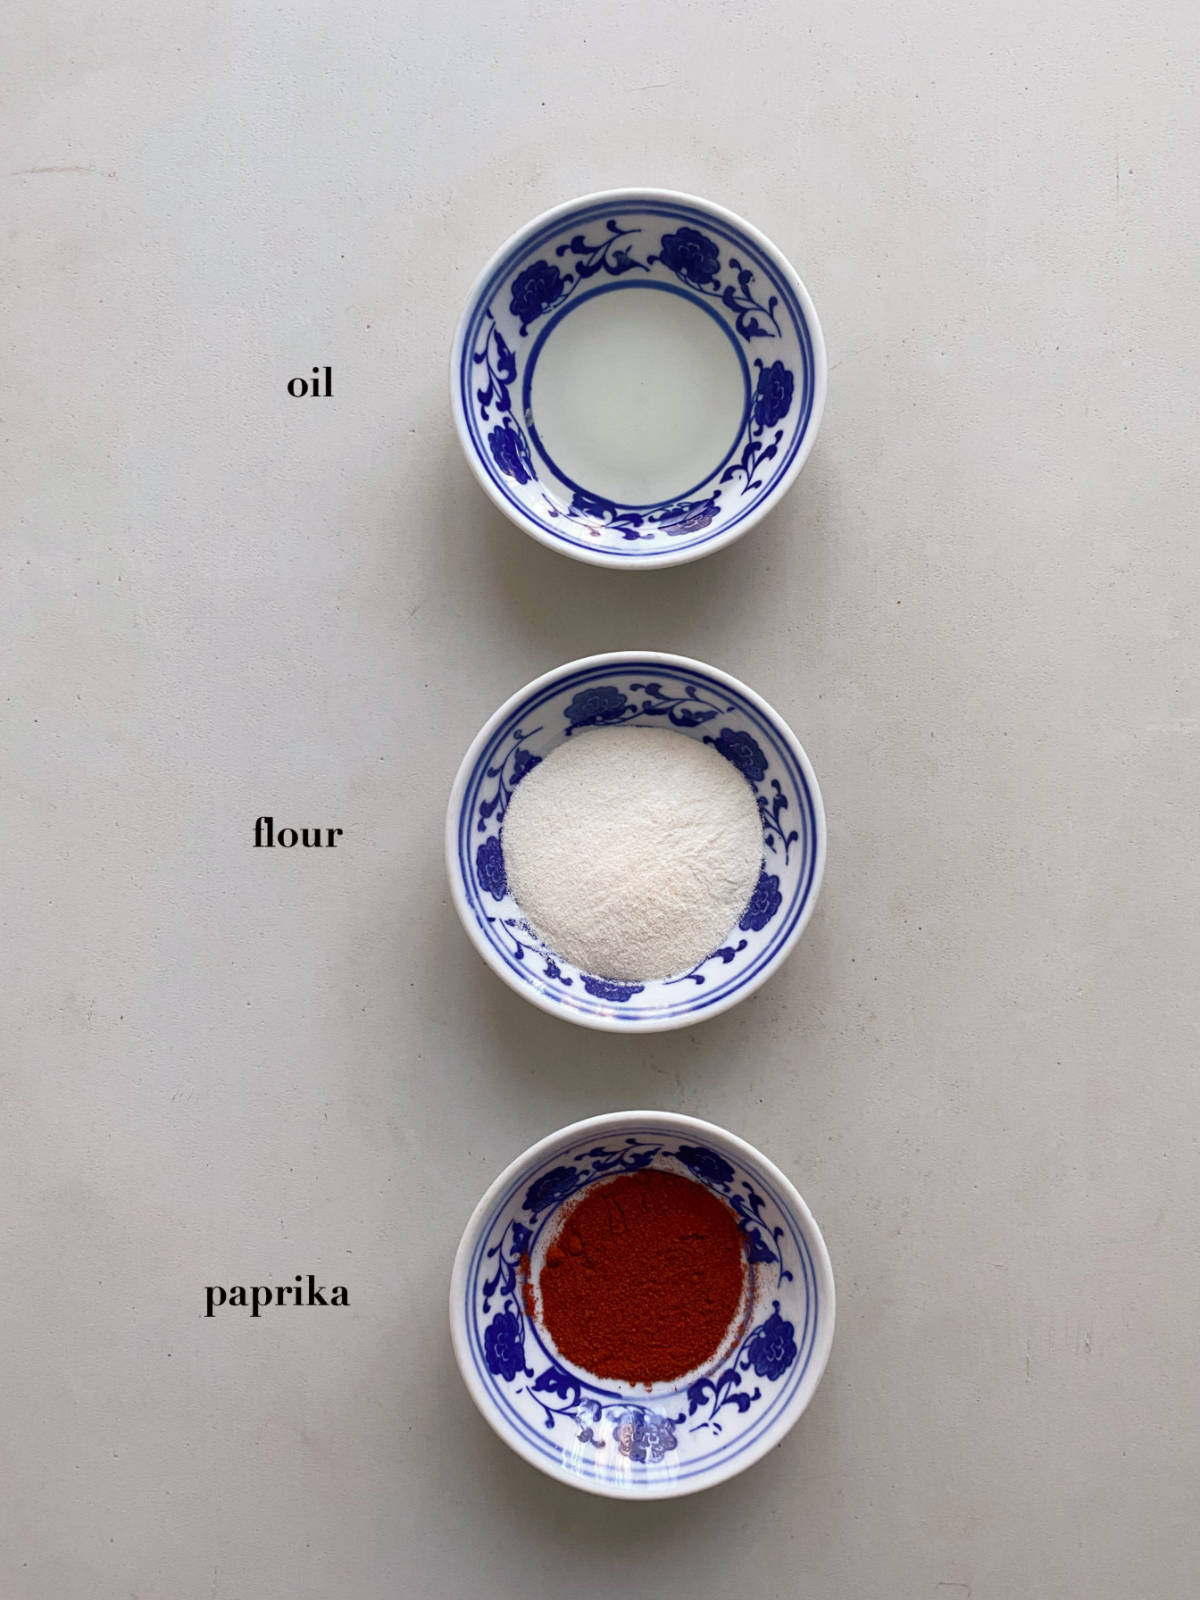 Oil, flour, paprika in ceramic containers on a gray background.